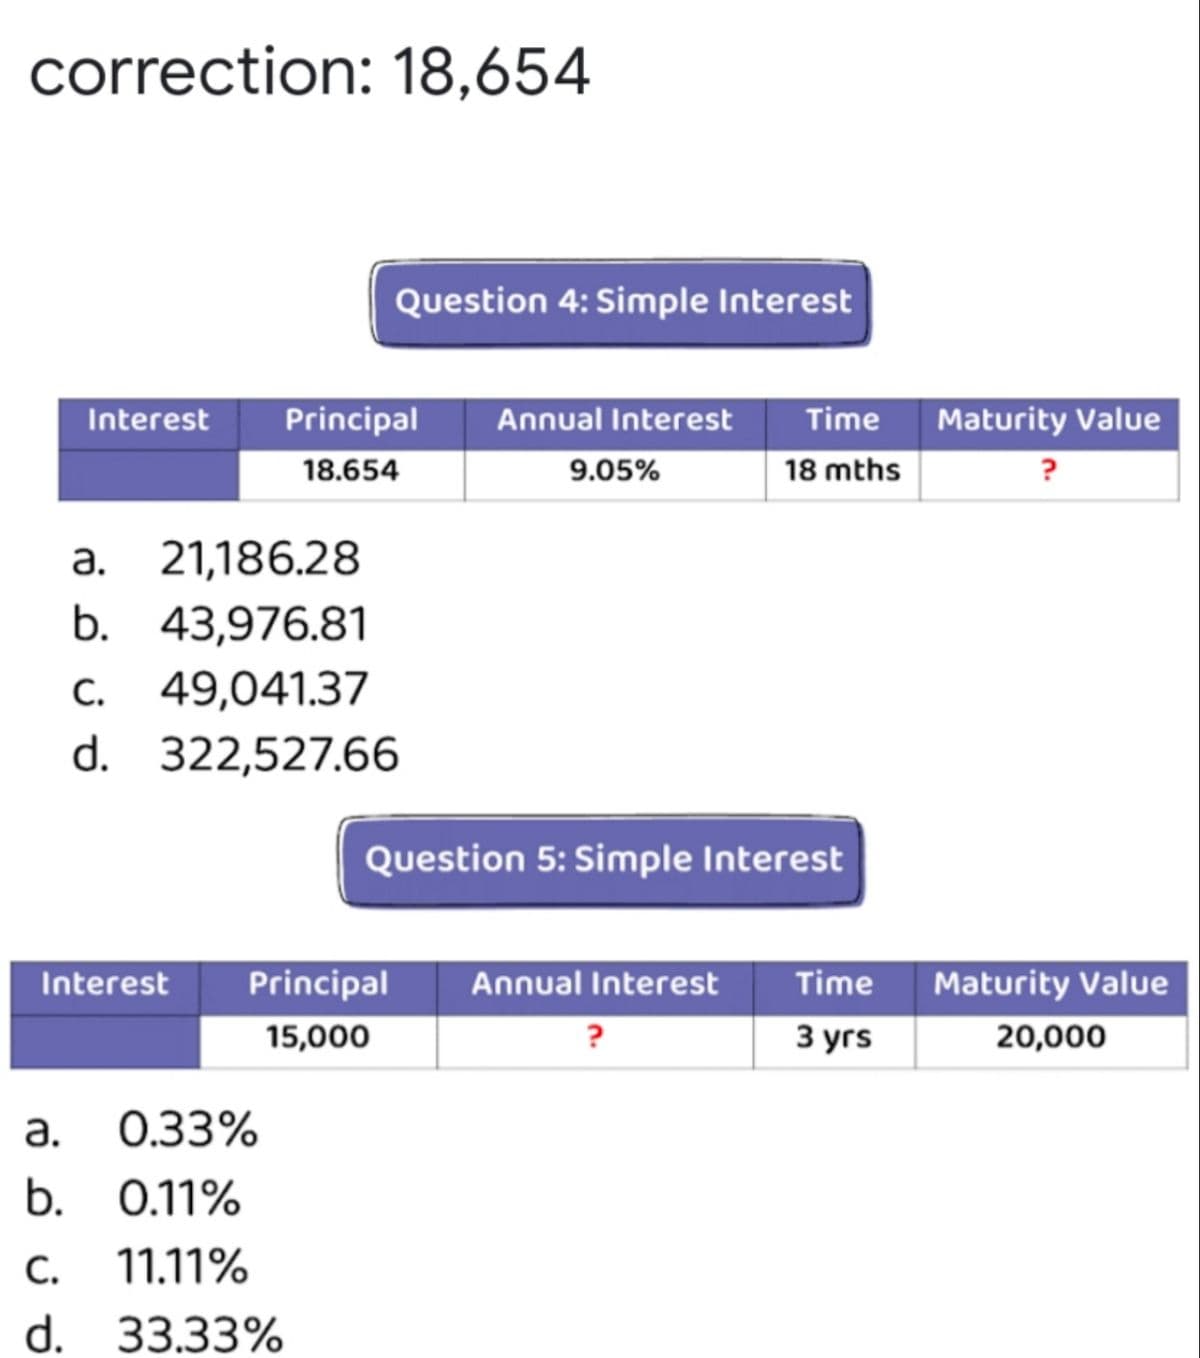 correction: 18,654
Question 4: Simple Interest
Interest
Principal
Annual Interest
Time
Maturity Value
18.654
9.05%
18 mths
a. 21,186.28
b. 43,976.81
c. 49,041.37
d. 322,527.66
С.
Question 5: Simple Interest
Interest
Principal
Annual Interest
Time
Maturity Value
15,000
?
3 уrs
20,000
а. О.33%
b. 0.11%
С.
11.11%
d. 33.33%
